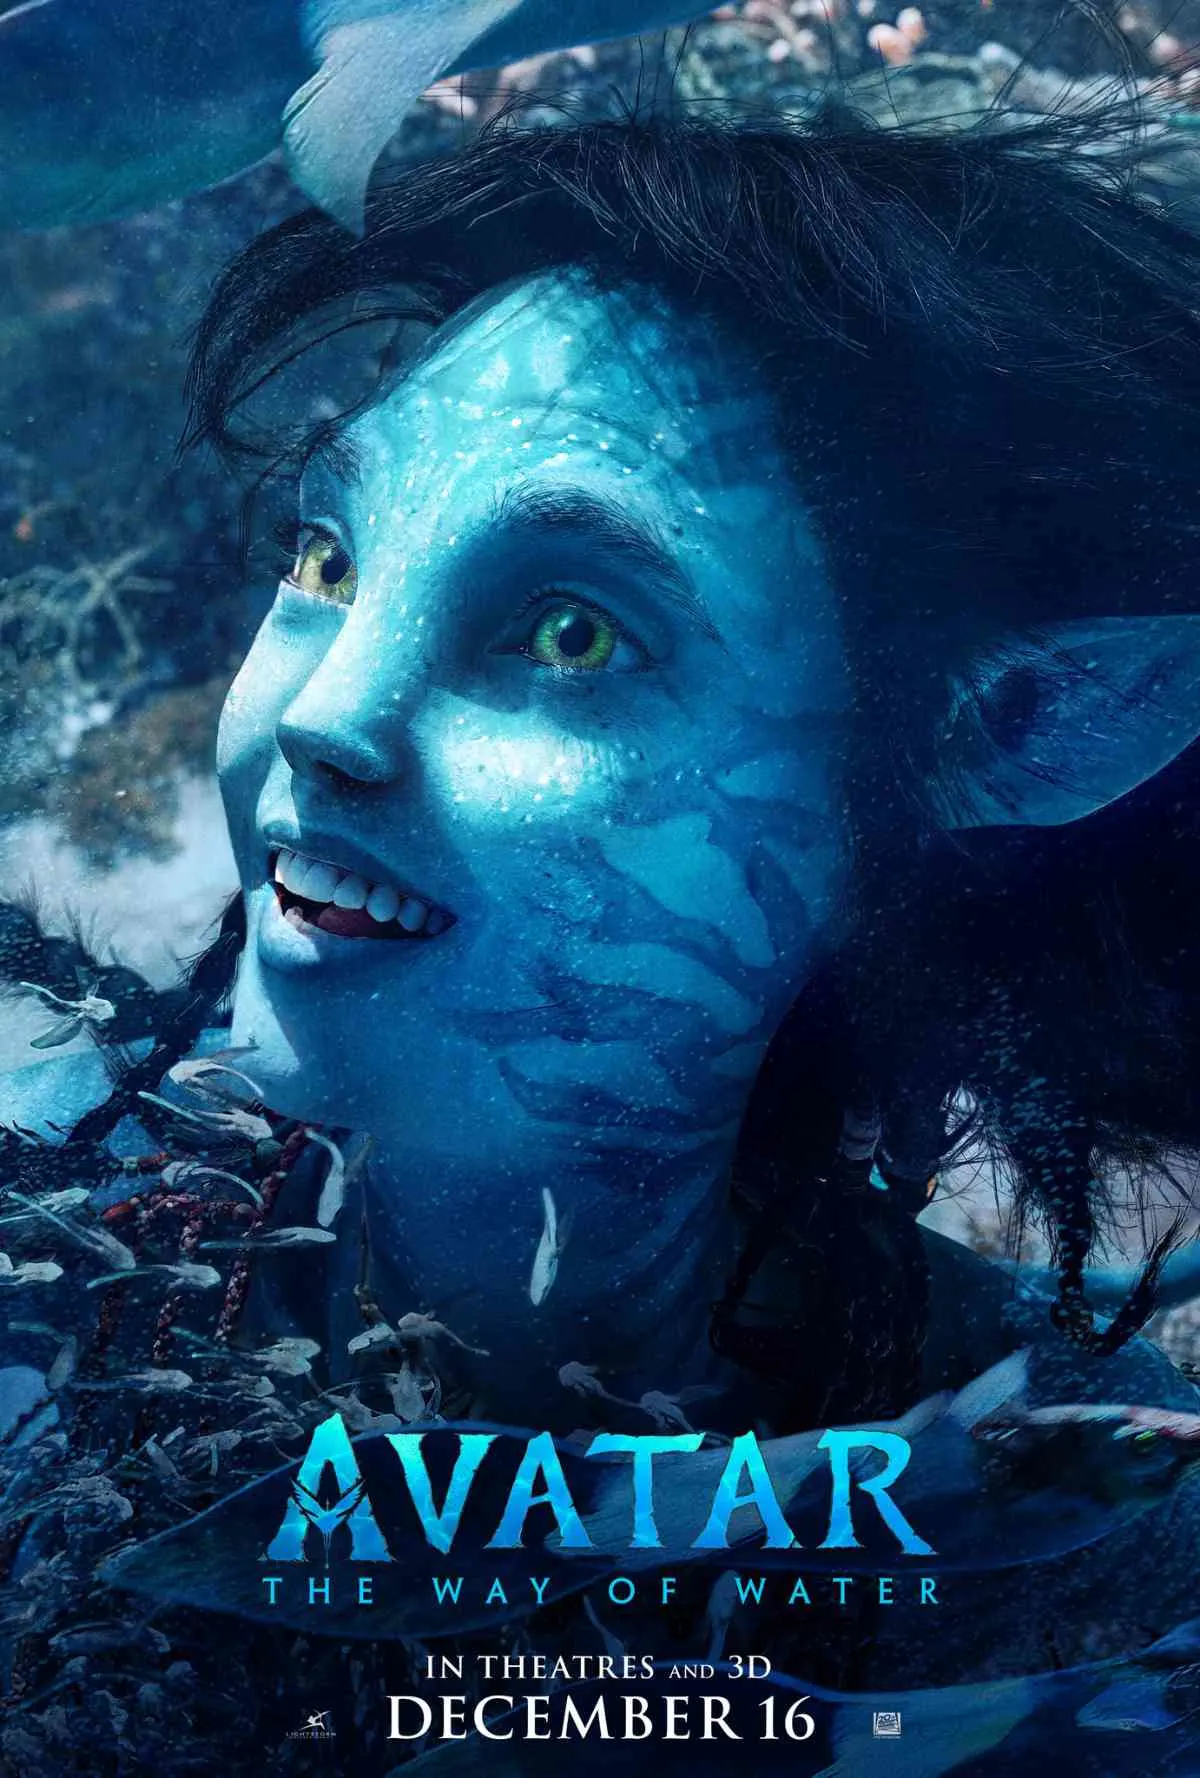 Way of Water Poster